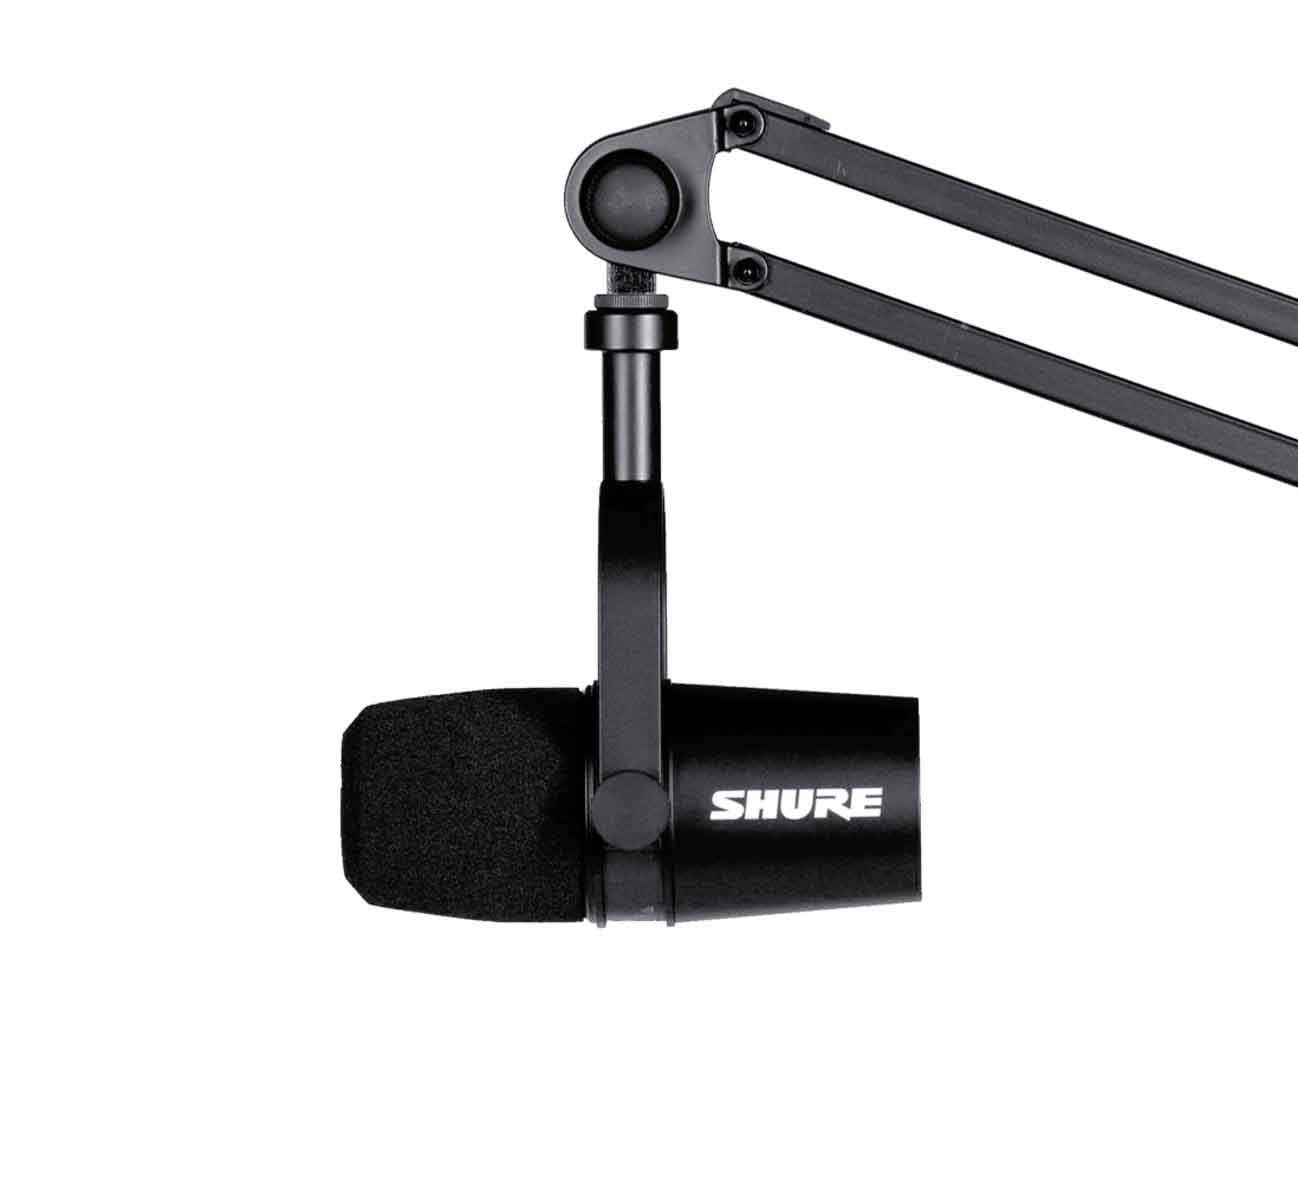 Shure Podcast Package with MV7 Podcast Microphone and Gator 3000 Microphone Boom Stand - Hollywood DJ